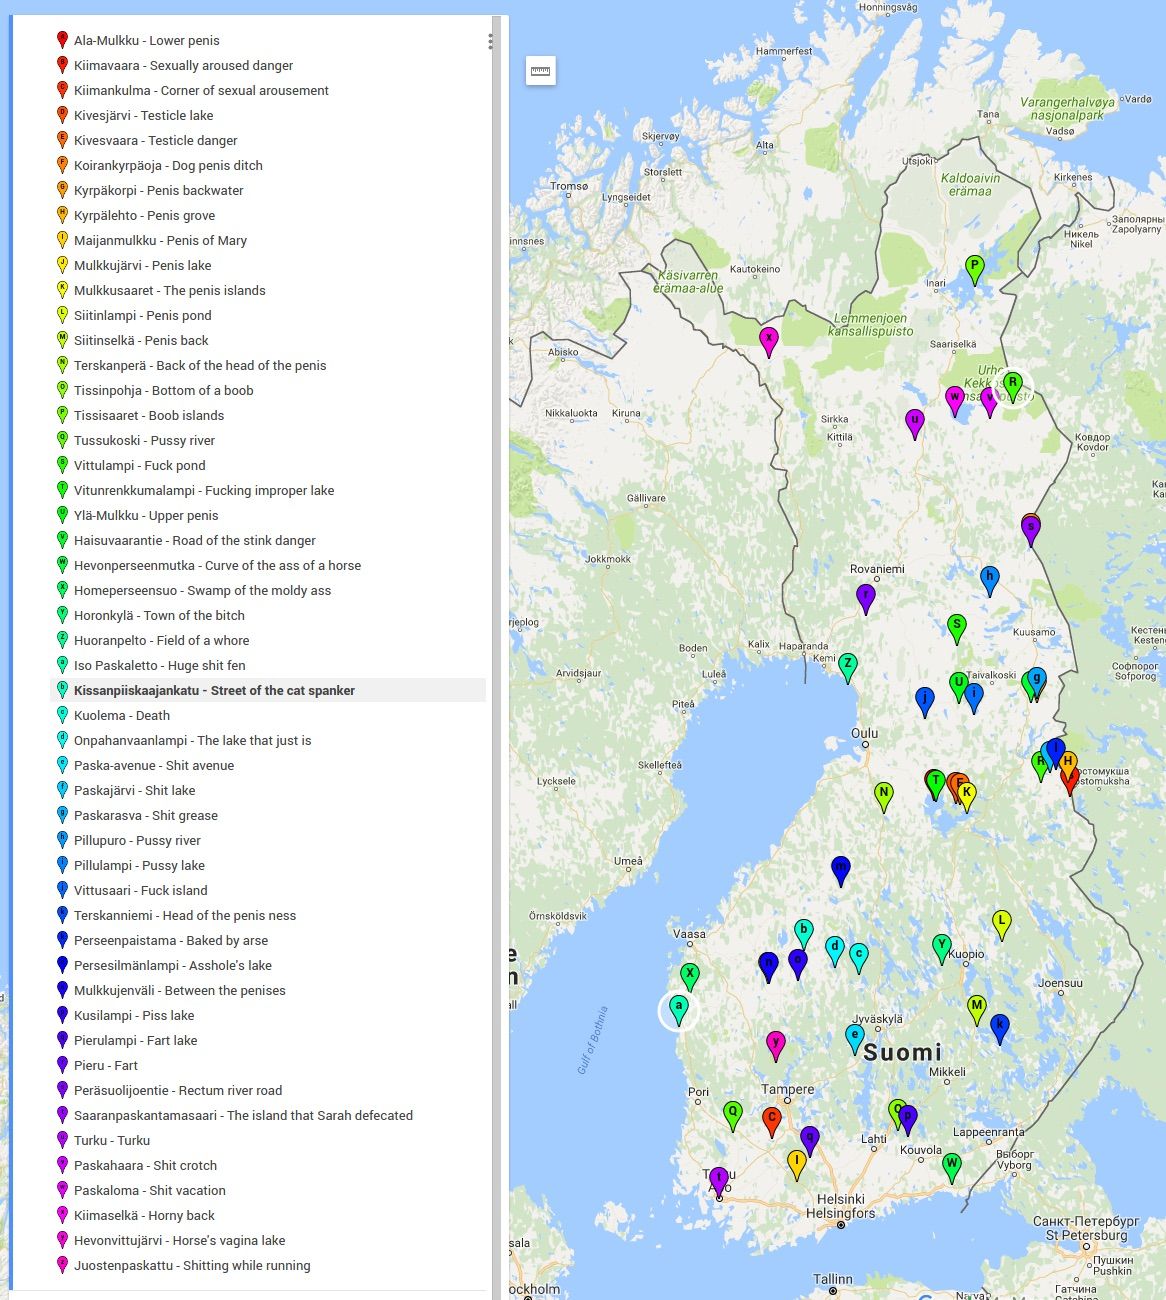 Dirty place names in Finland